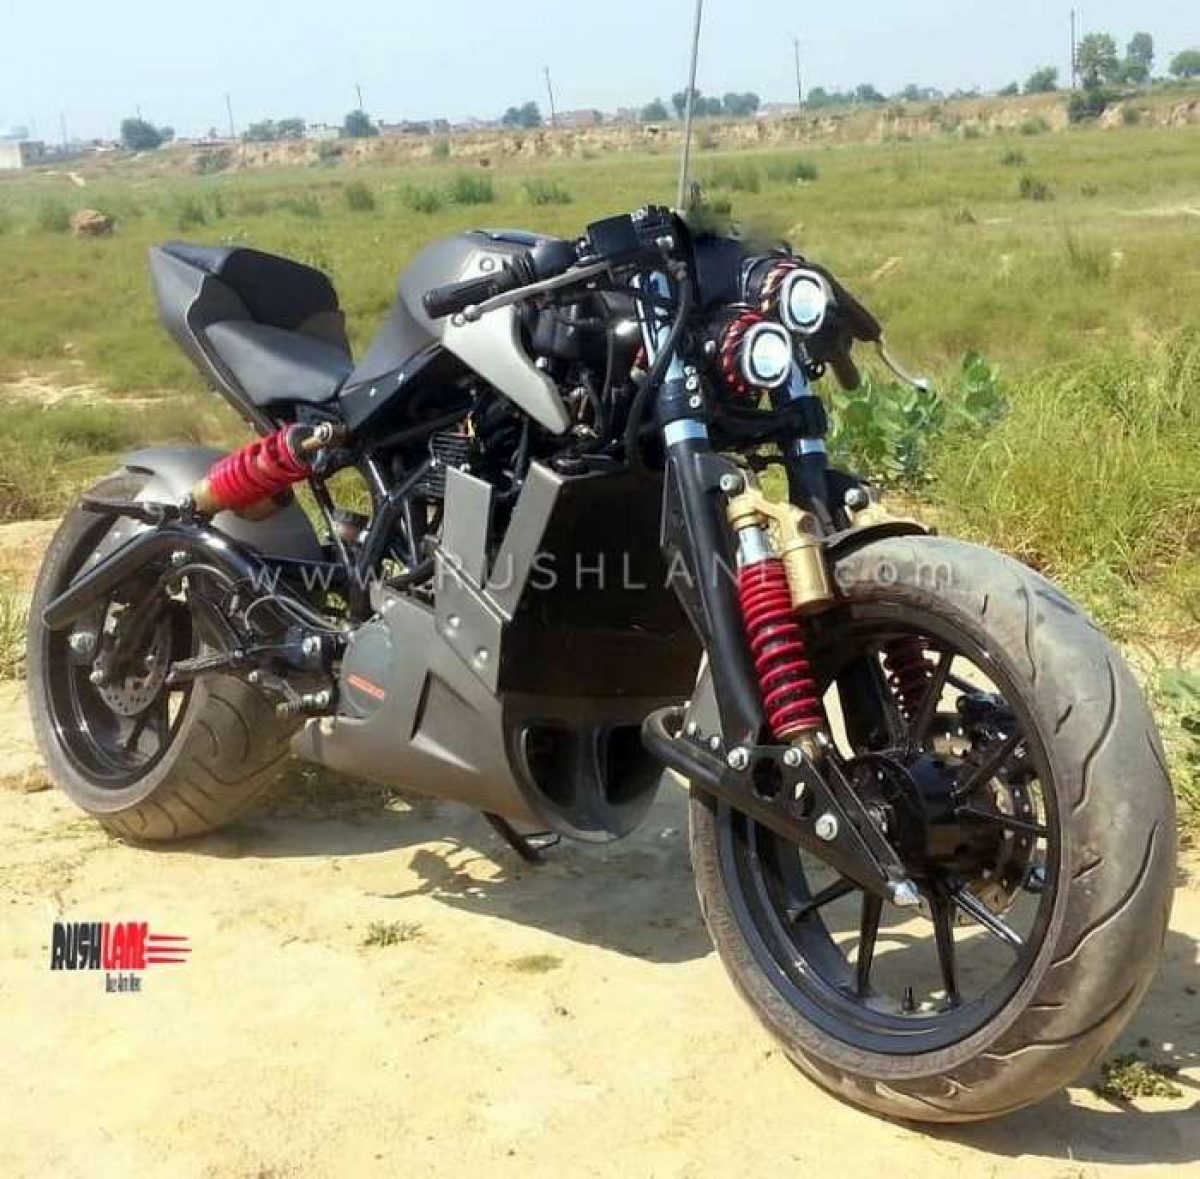 Ktm Duke 200 Modified Into A Streetfighter For Rs 1 55 Lakhs